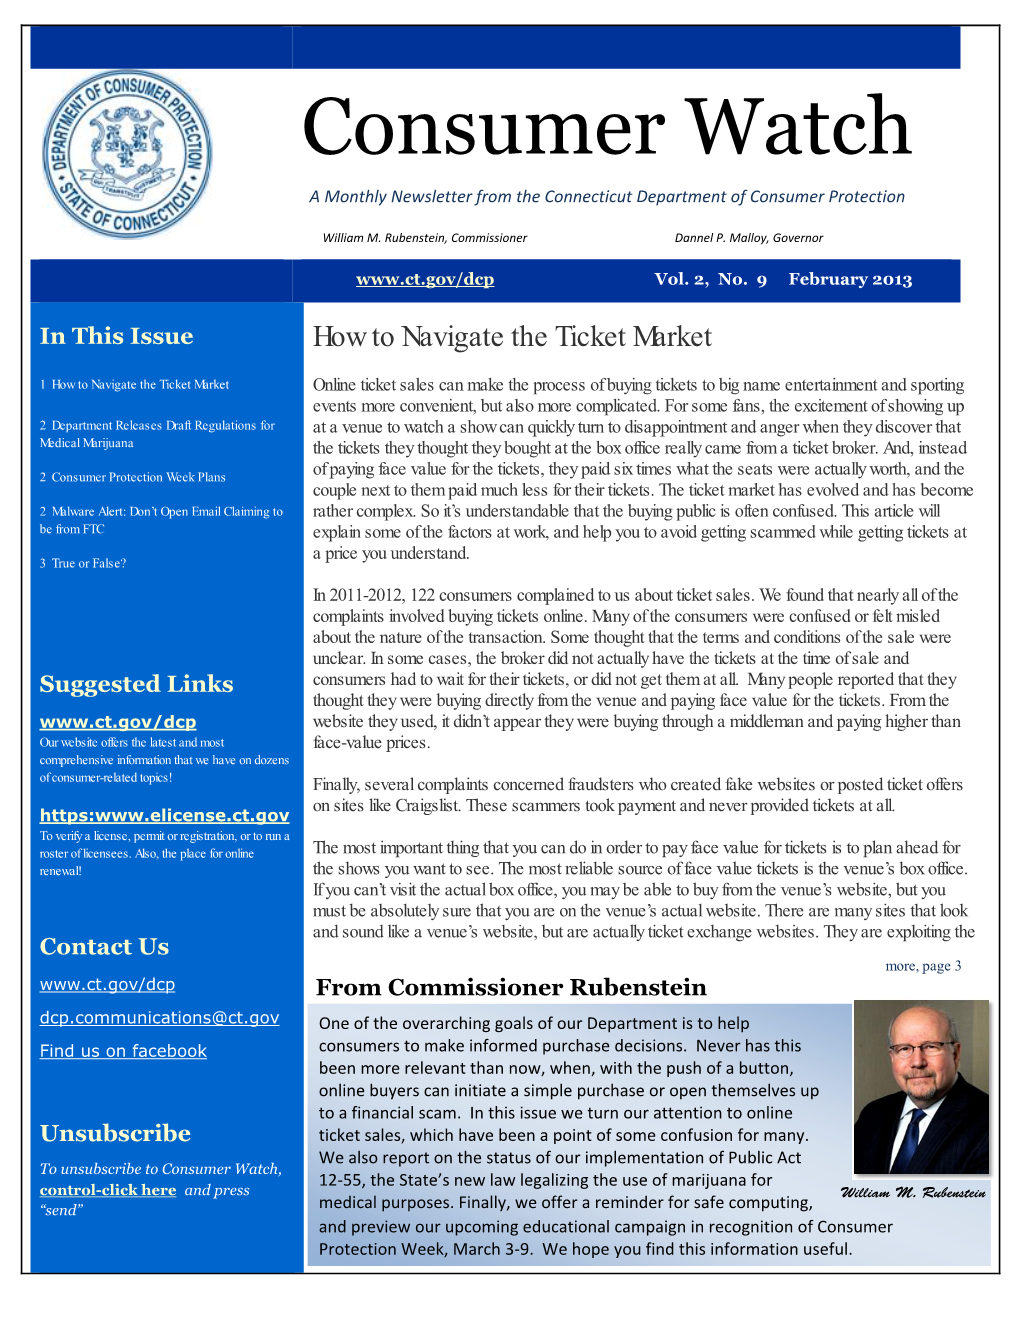 Consumer Watch a Monthly Newsletter from the Connecticut Department of Consumer Protection